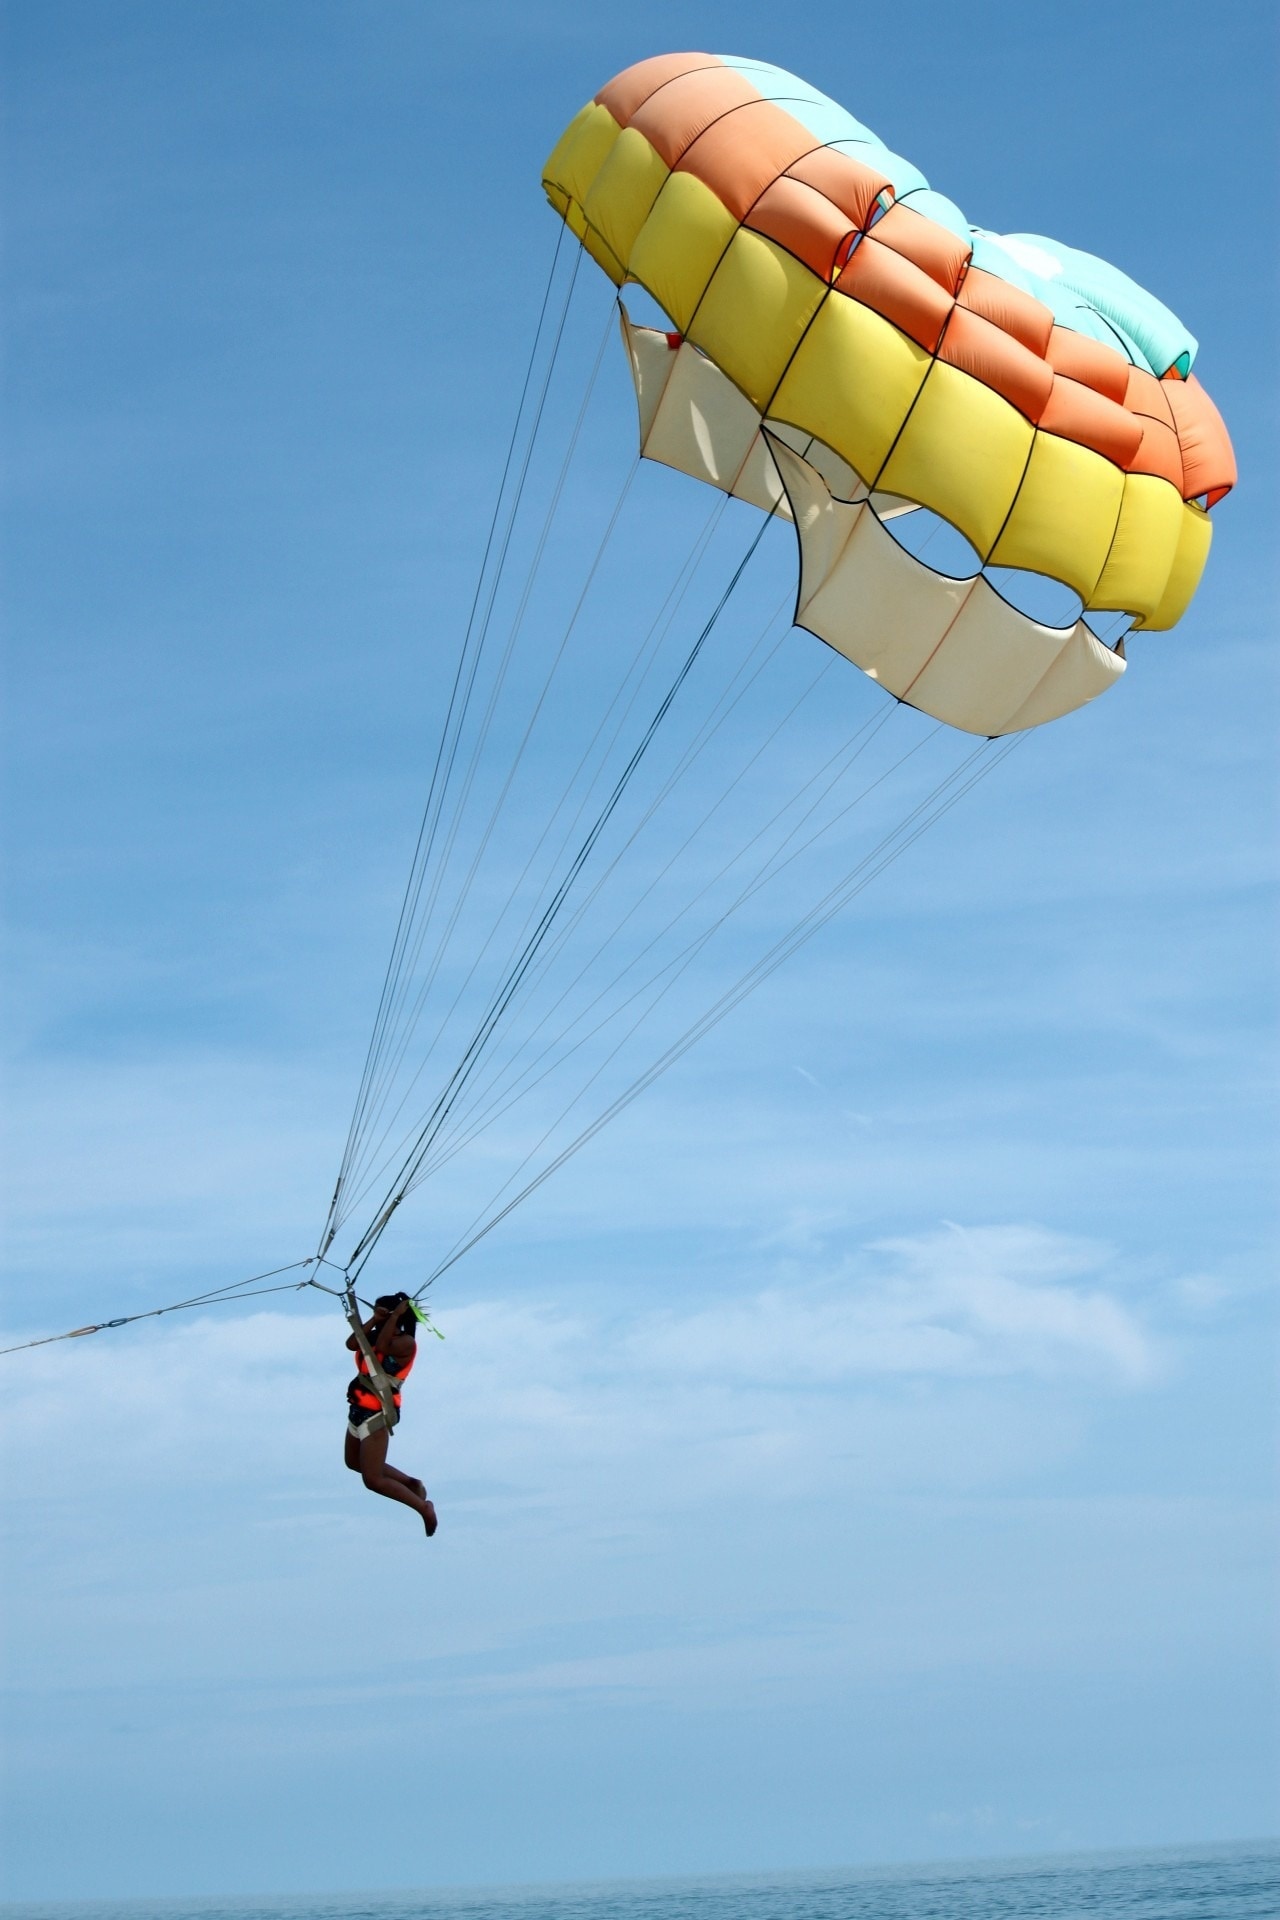 Parasailing: Controllable parachuting, Extreme sports, The flyers take off upwards, Paragliding. 1280x1920 HD Background.